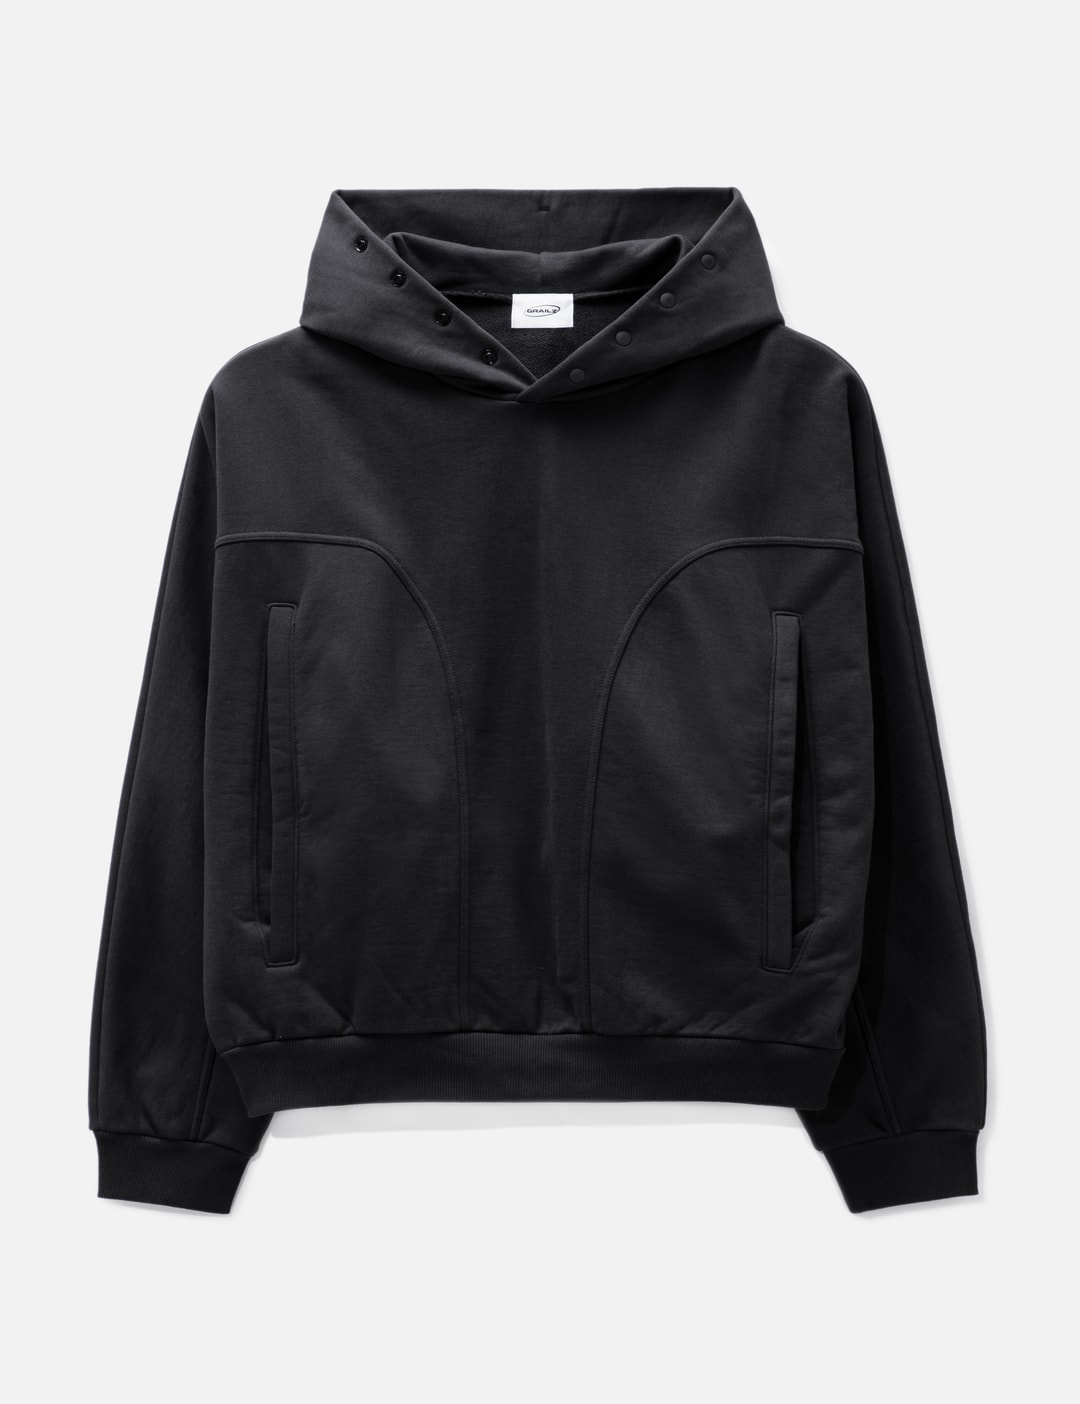 GRAILZ - Geometry Hoodie | HBX - Globally Curated Fashion and Lifestyle ...